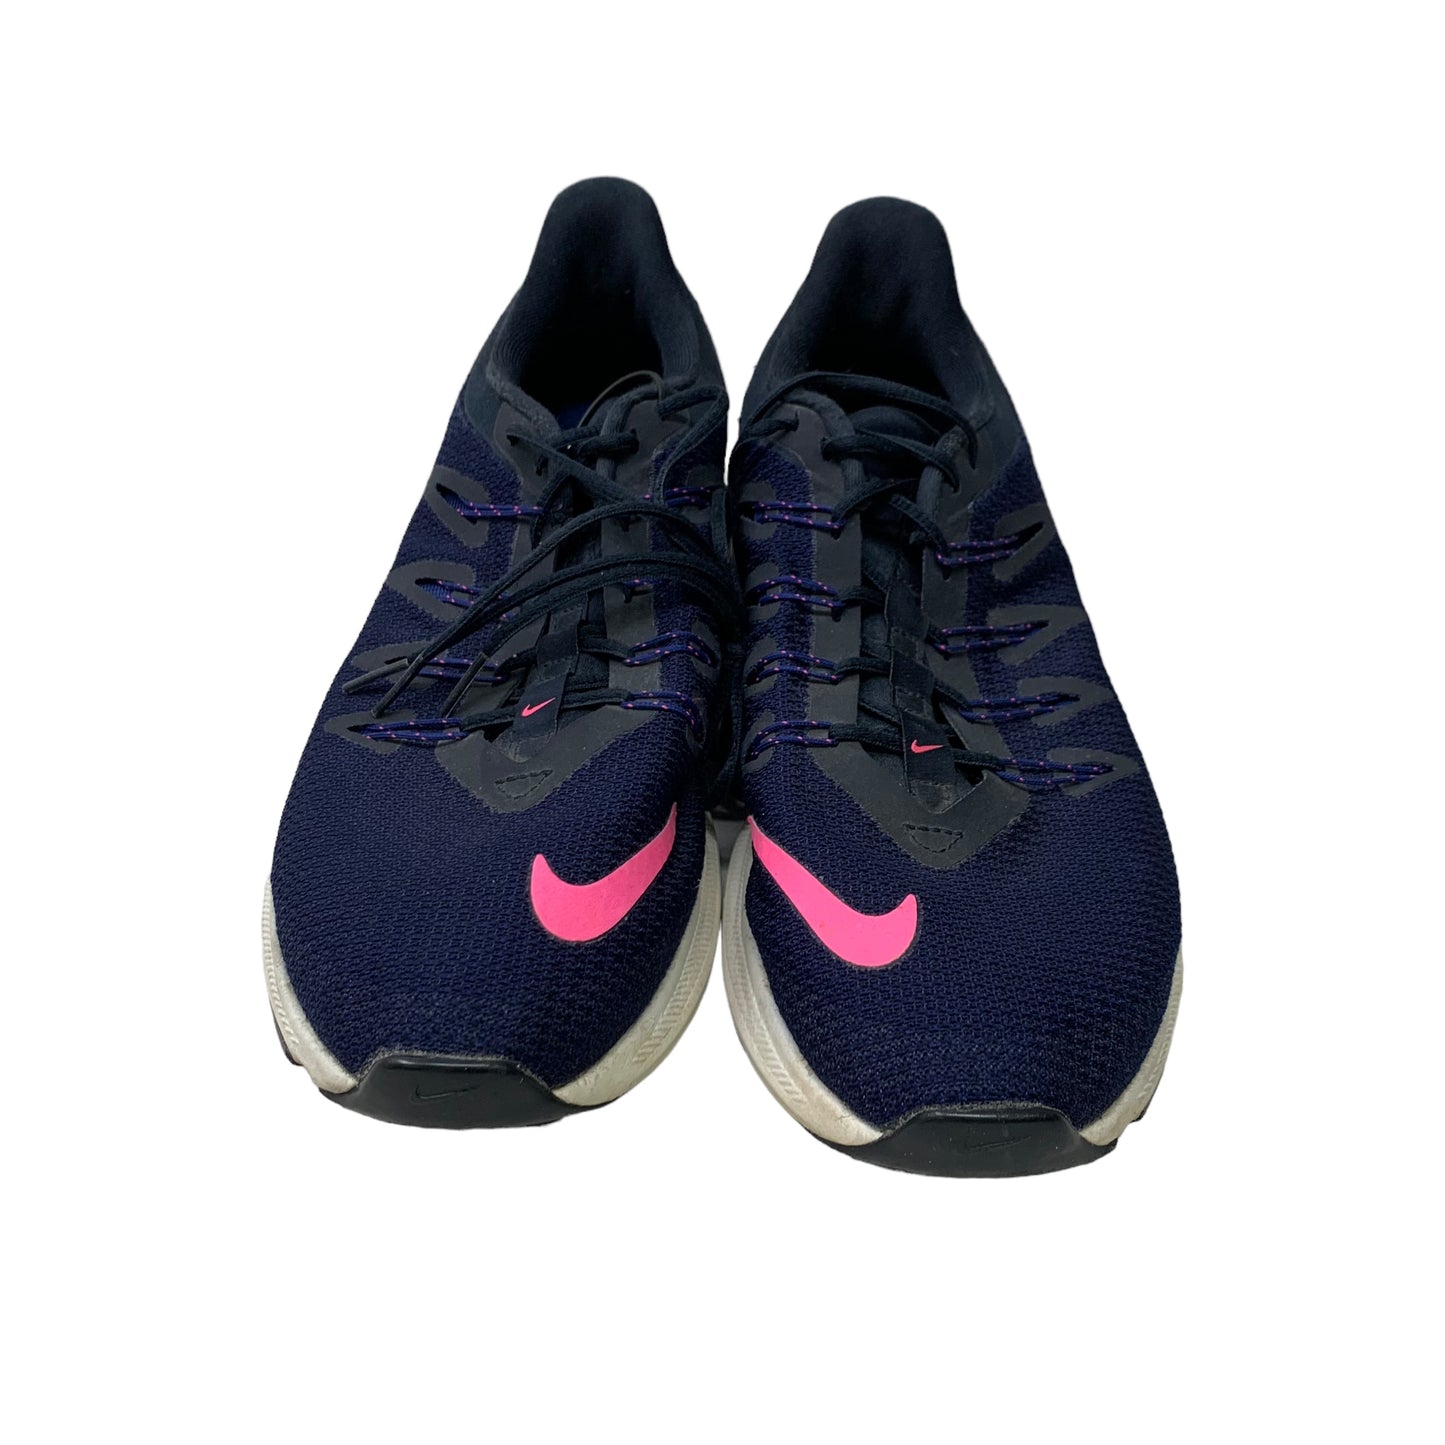 Shoes Athletic By Nike  Size: 9.5